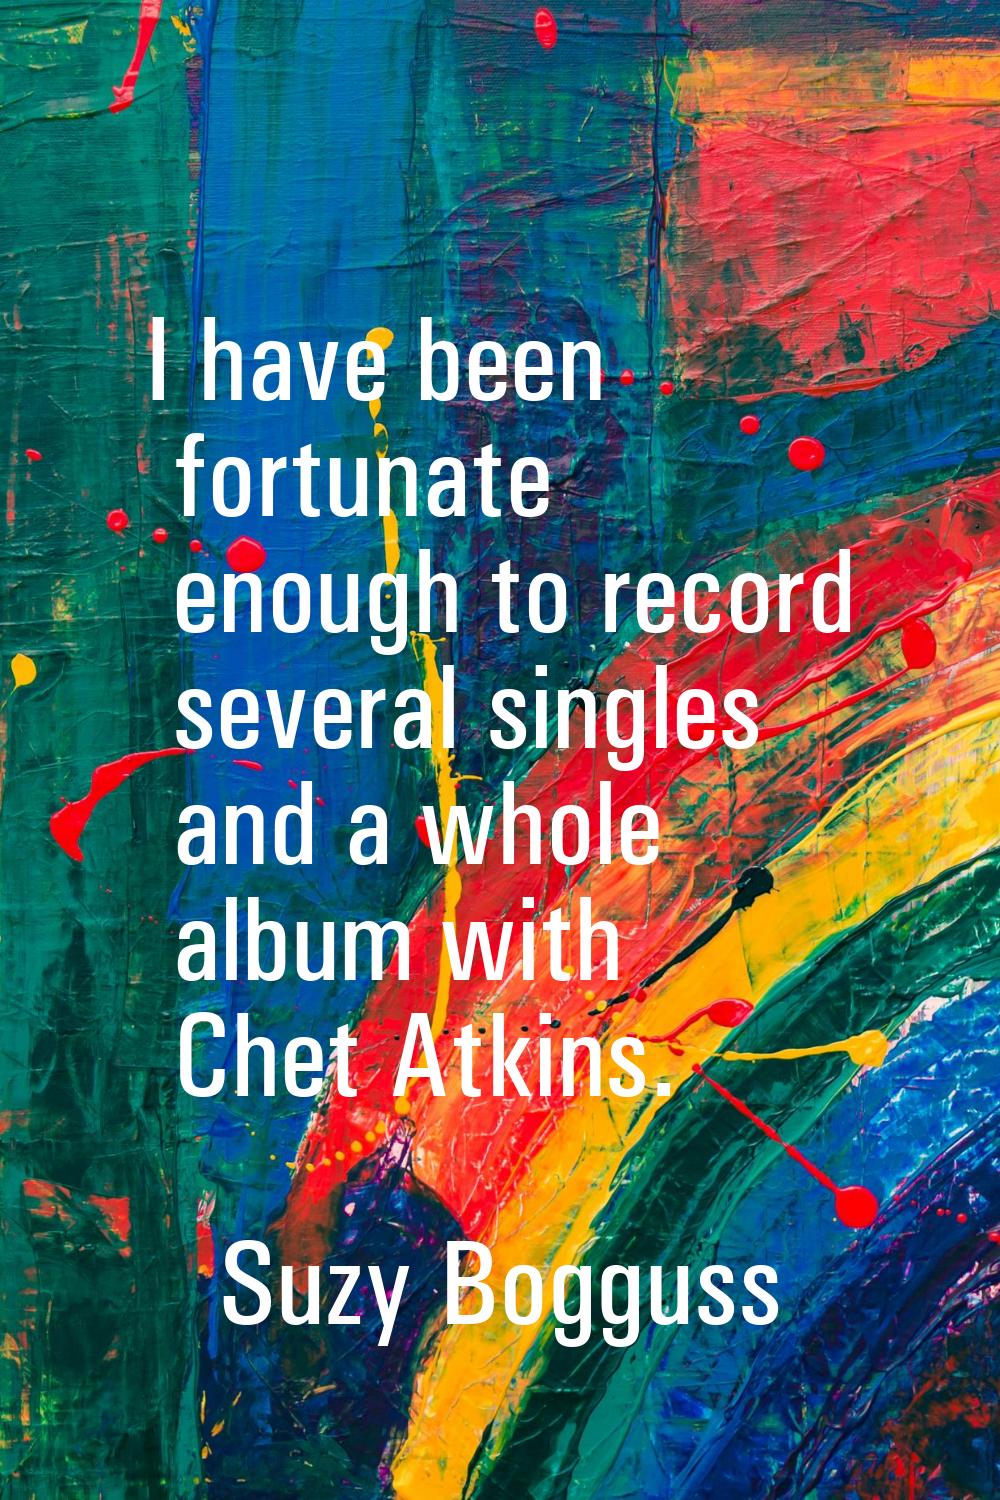 I have been fortunate enough to record several singles and a whole album with Chet Atkins.